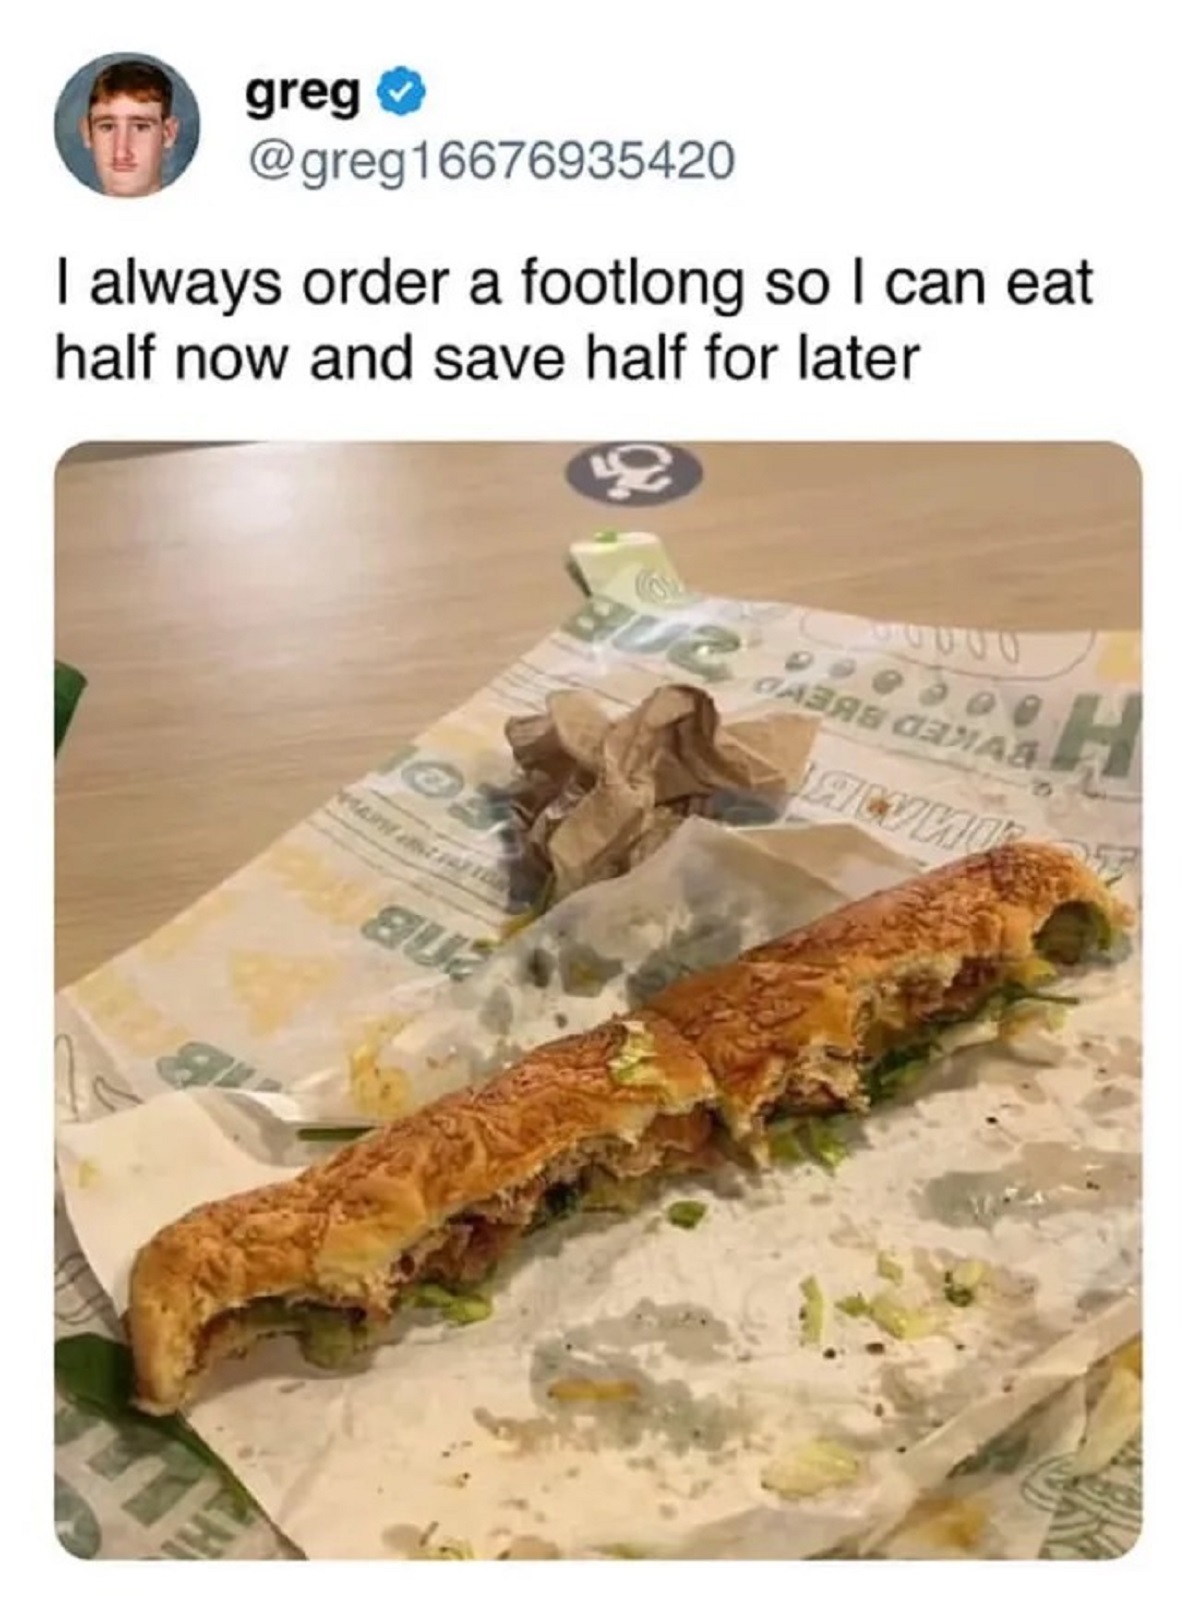 recipe - greg I always order a footlong so I can eat half now and save half for later o 802 Dabas Cemas Awnu H